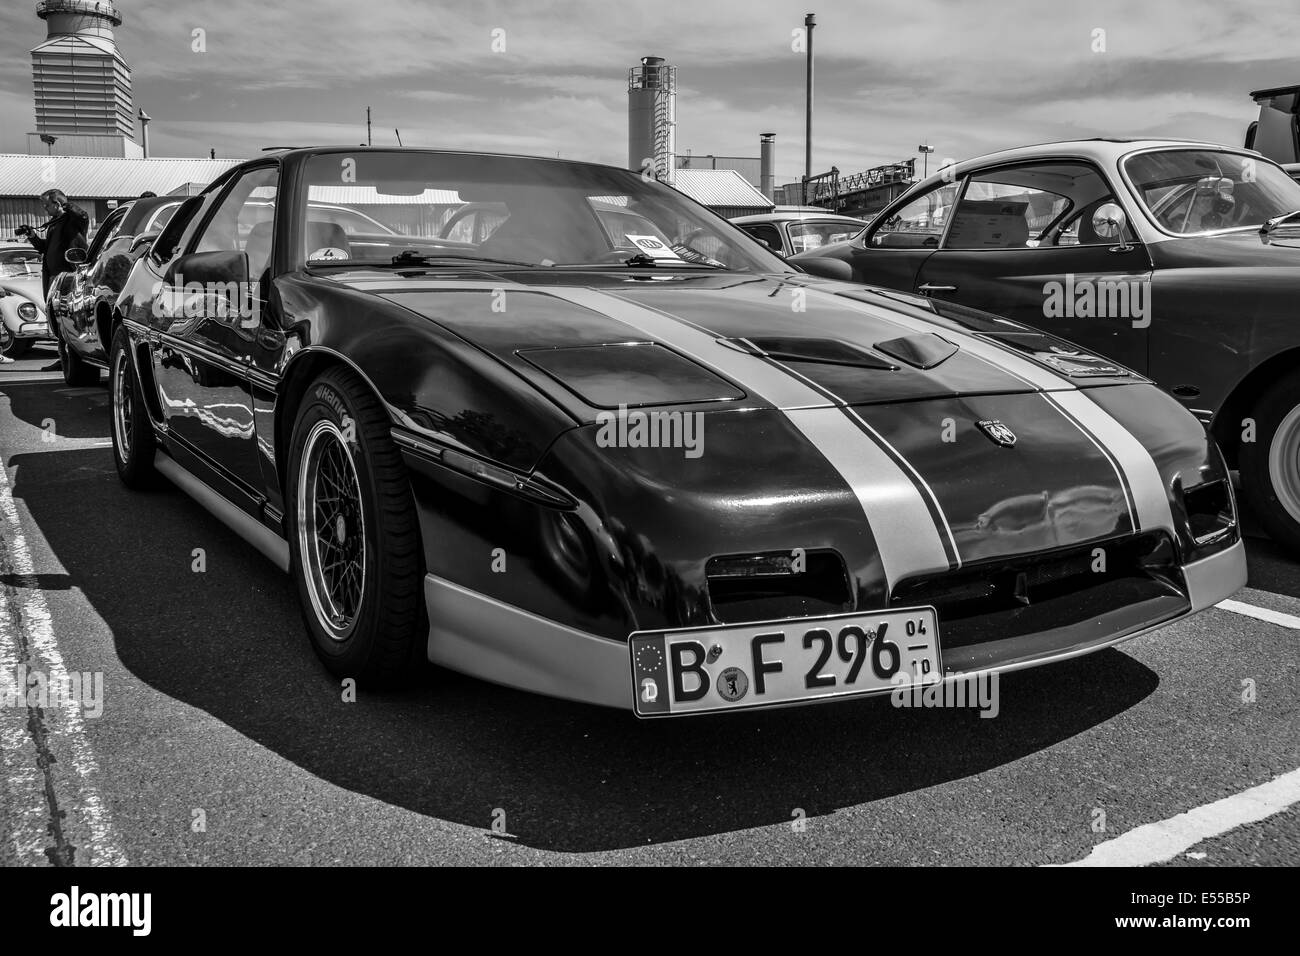 BERLIN, GERMANY - MAY 17, 2014: Mid-engined sports car Pontiac Fiero GT. Black and white. 27th Oldtimer Day Berlin - Brandenburg Stock Photo